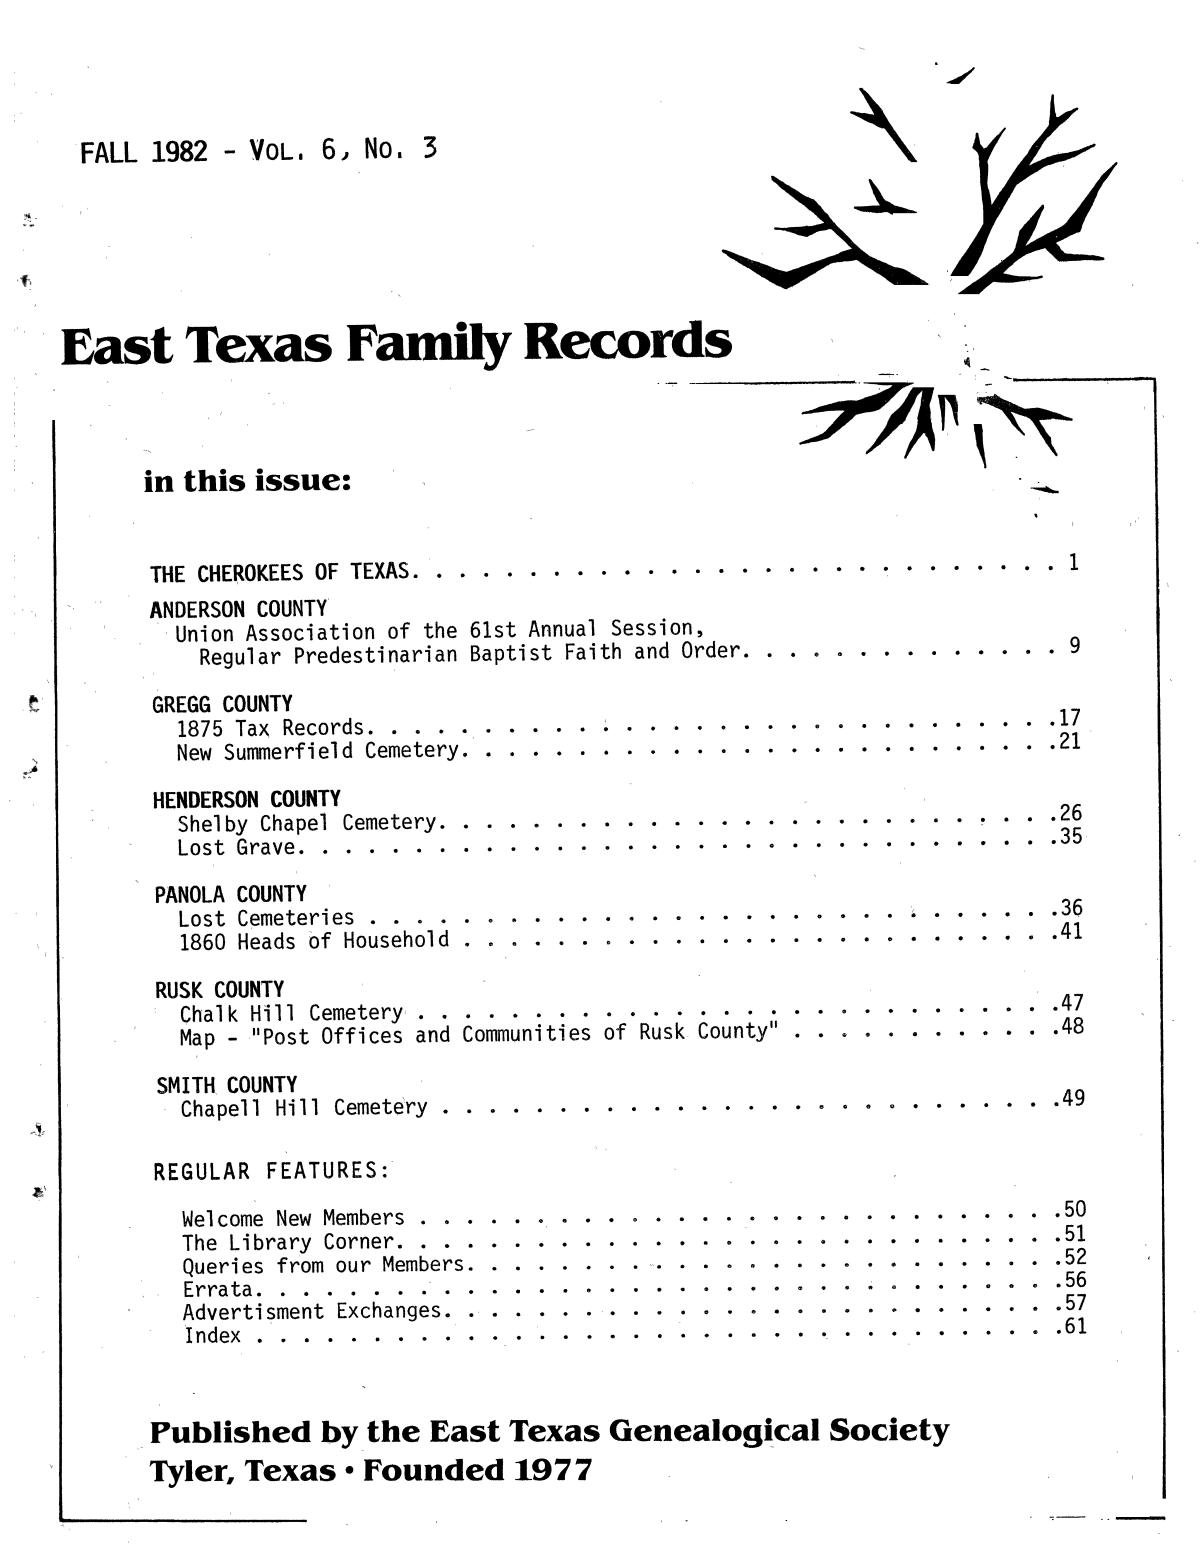 East Texas Family Records, Volume 6, Number 3, Fall 1982
                                                
                                                    Front Cover
                                                